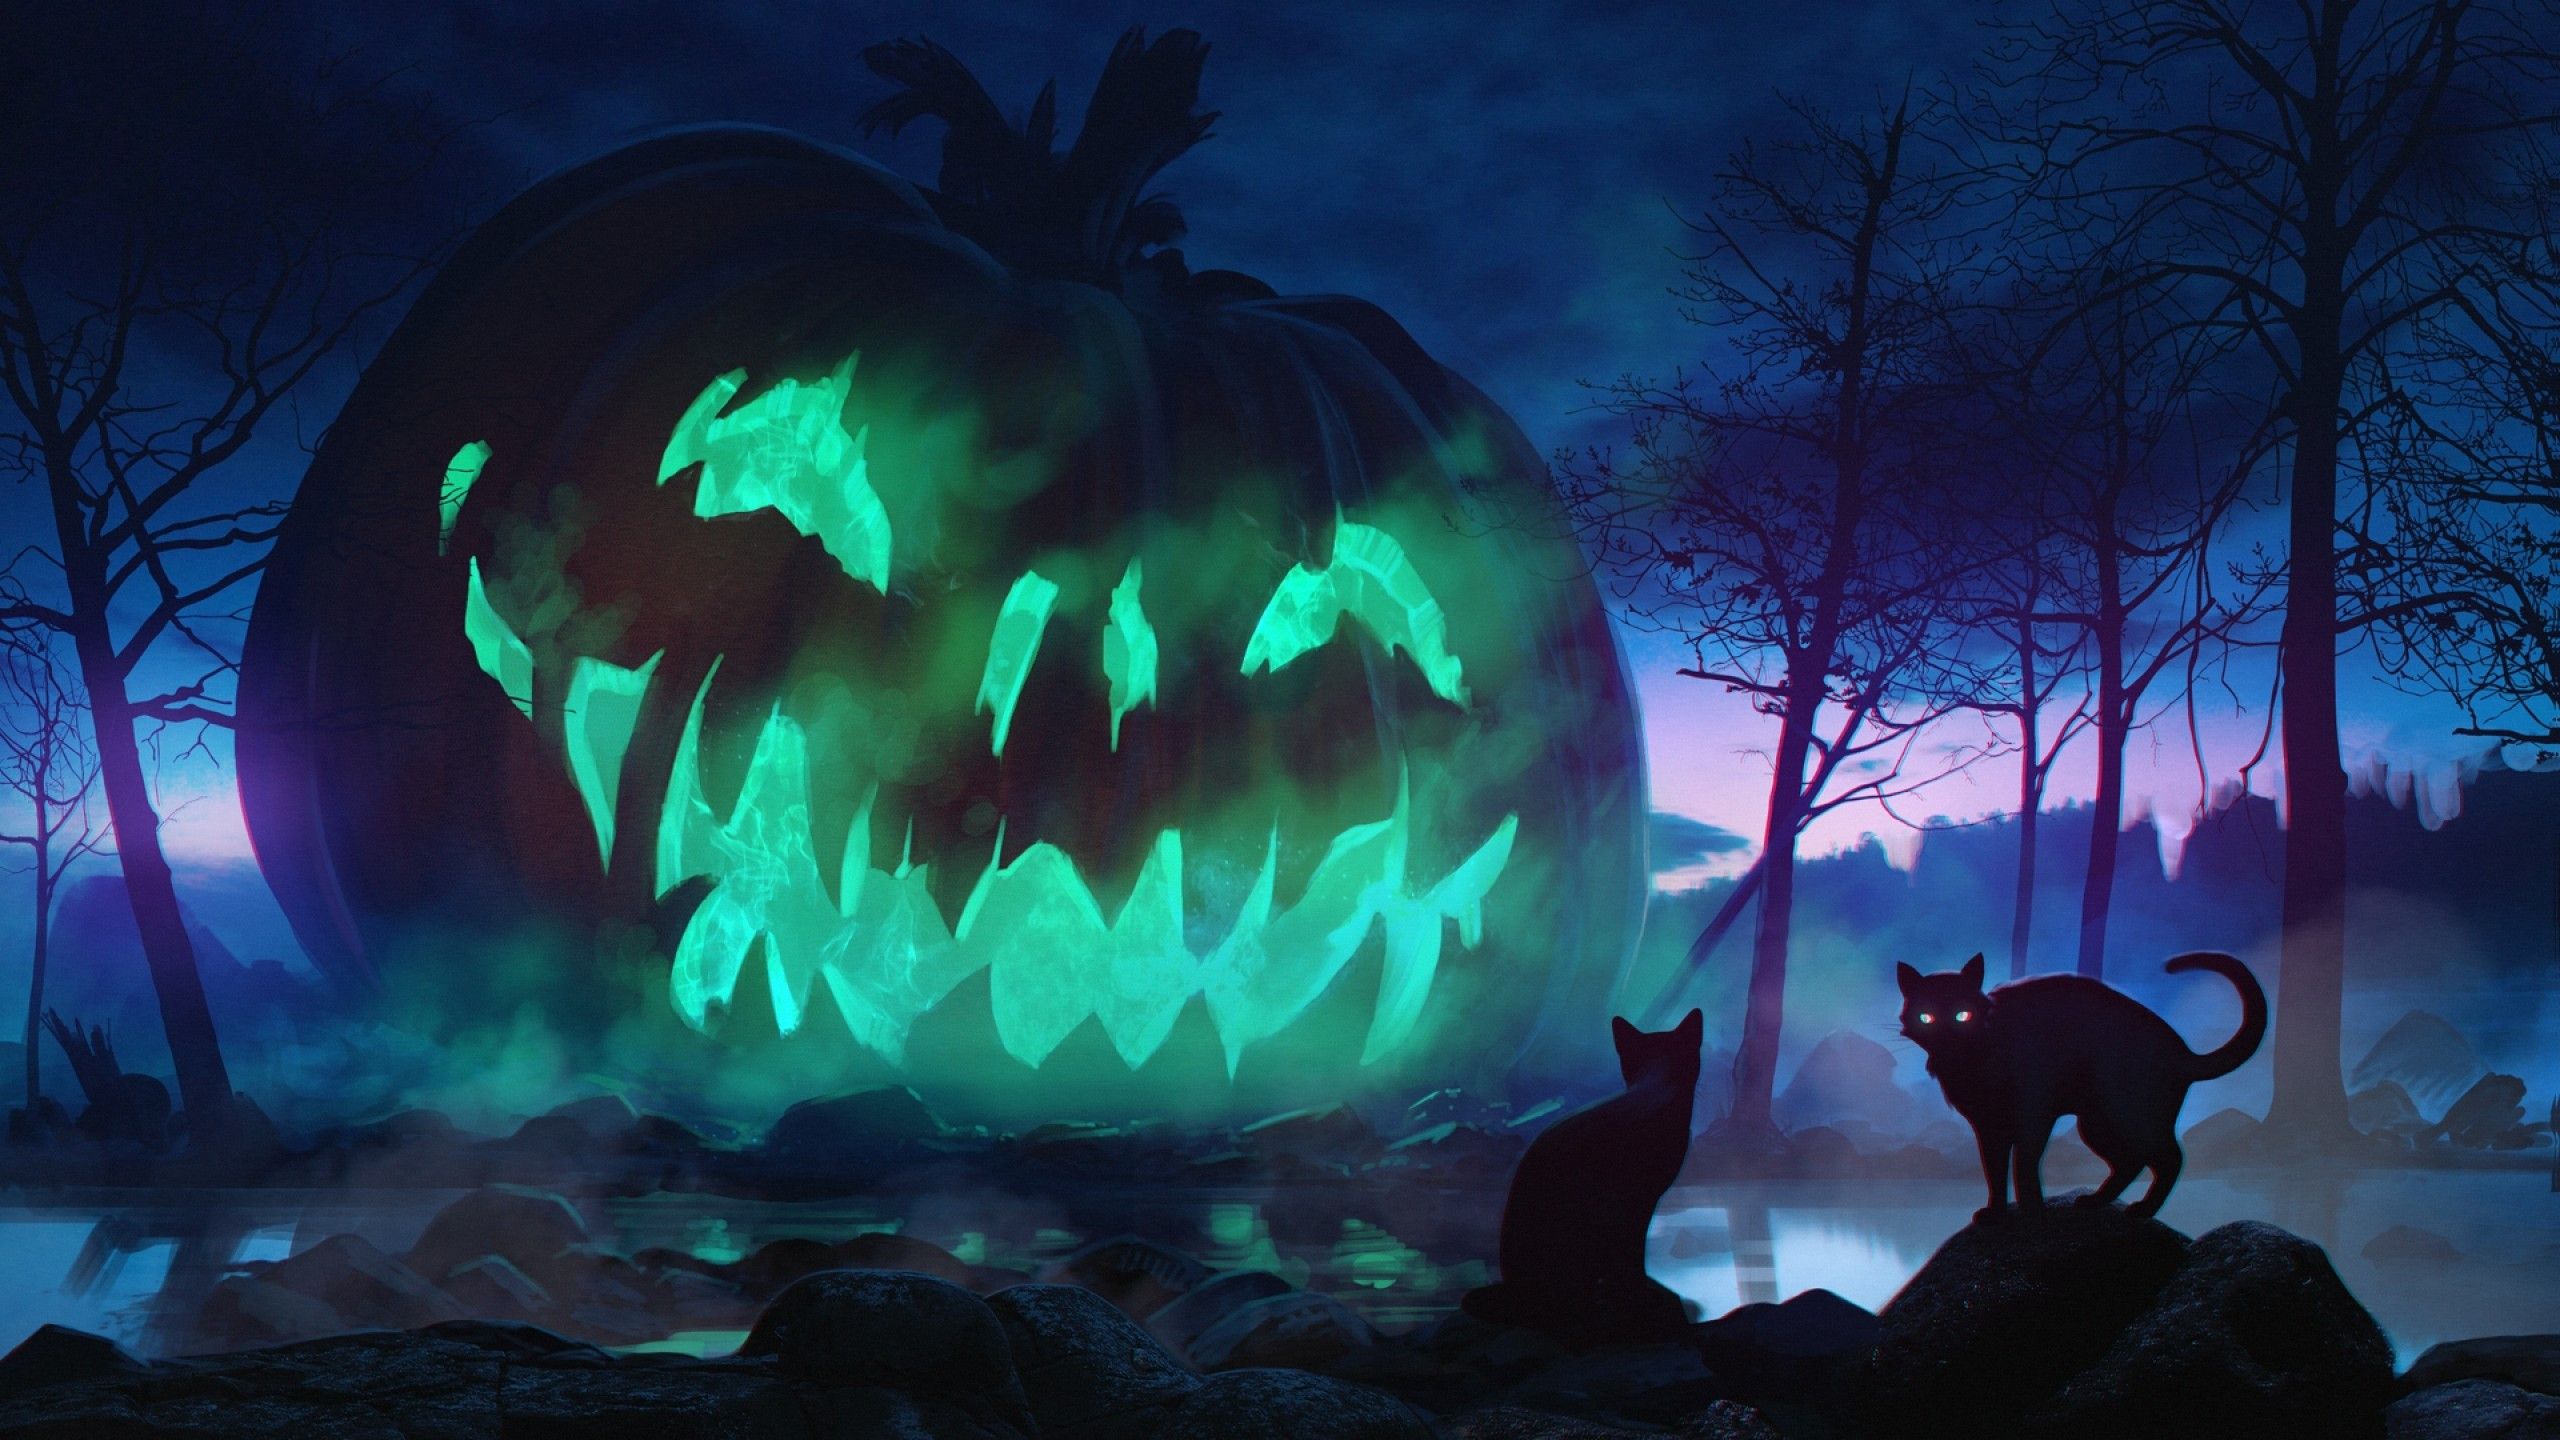 Download 2560x1440 Halloween, Giant Pumpkin, Scary, Cats, Dark Theme, Forest, Fog, Stones Wallpaper for iMac 27 inch